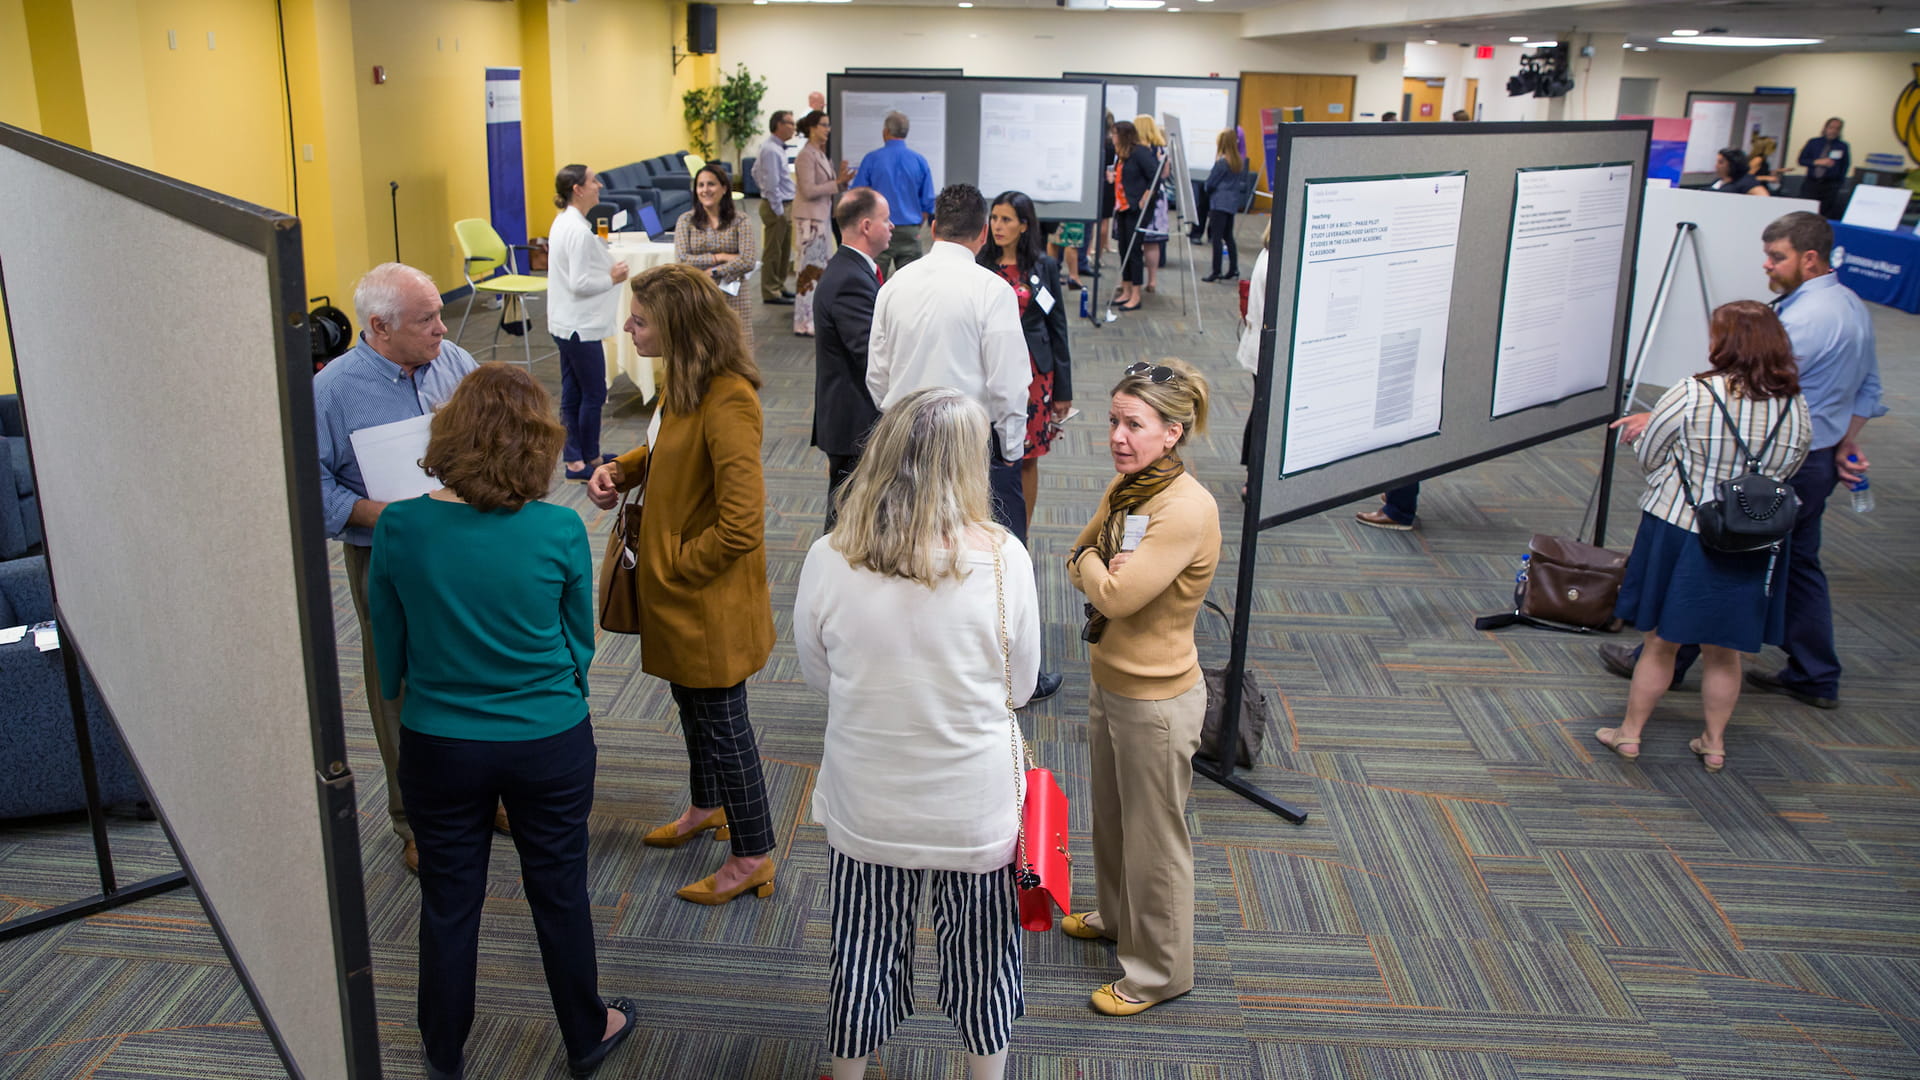 Attendees at the 2019 JWU Faculty Showcase.